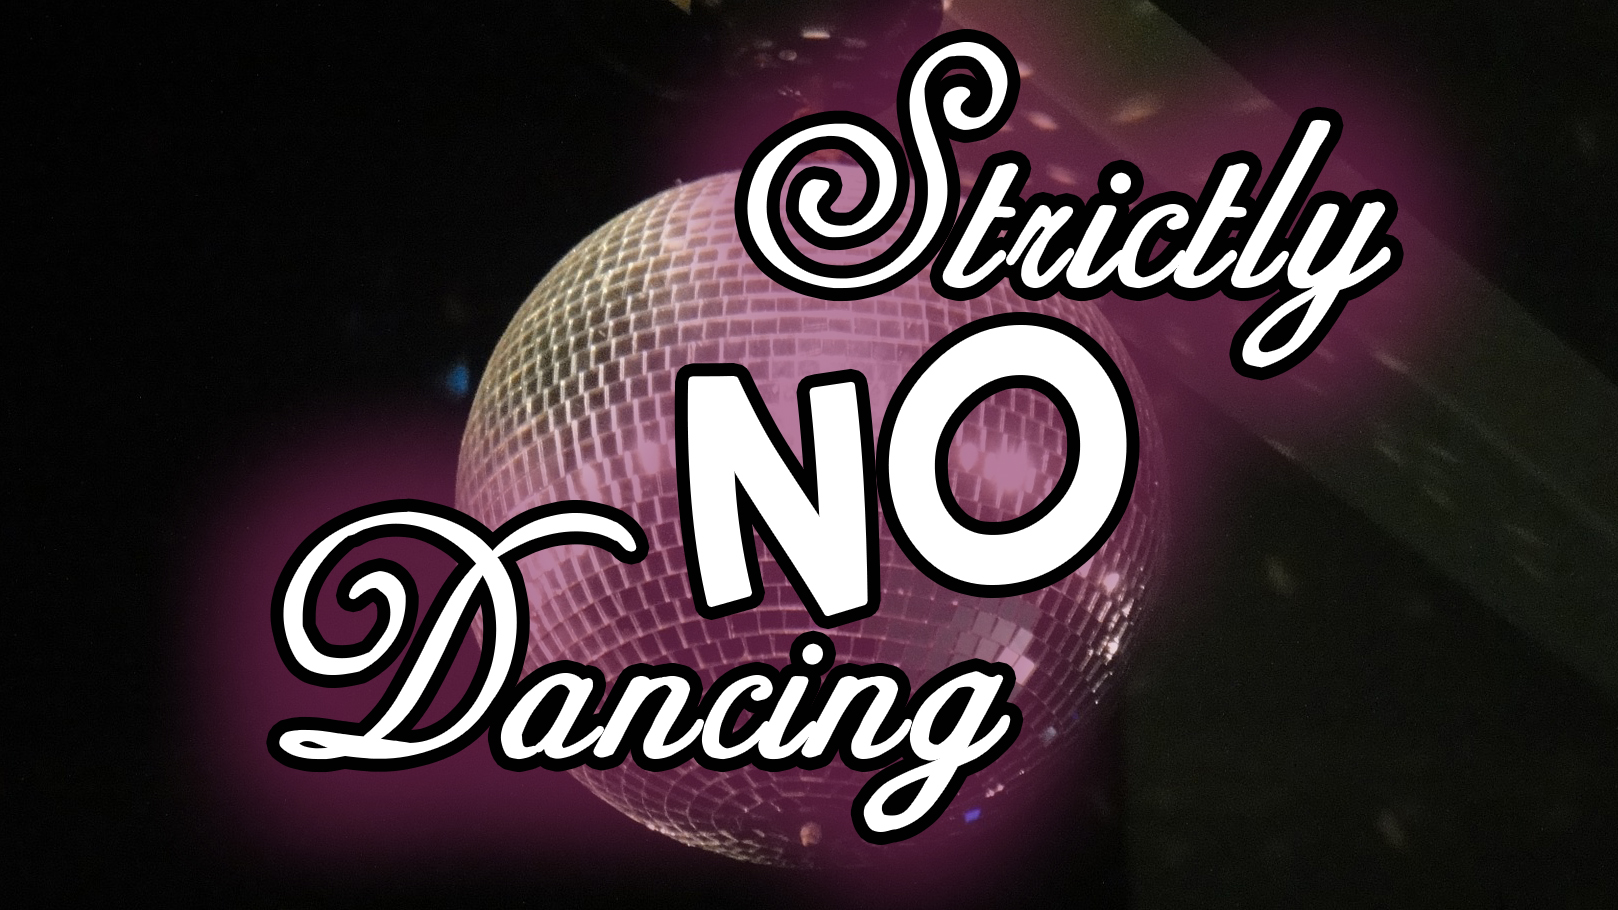 Strictly No Dancing!